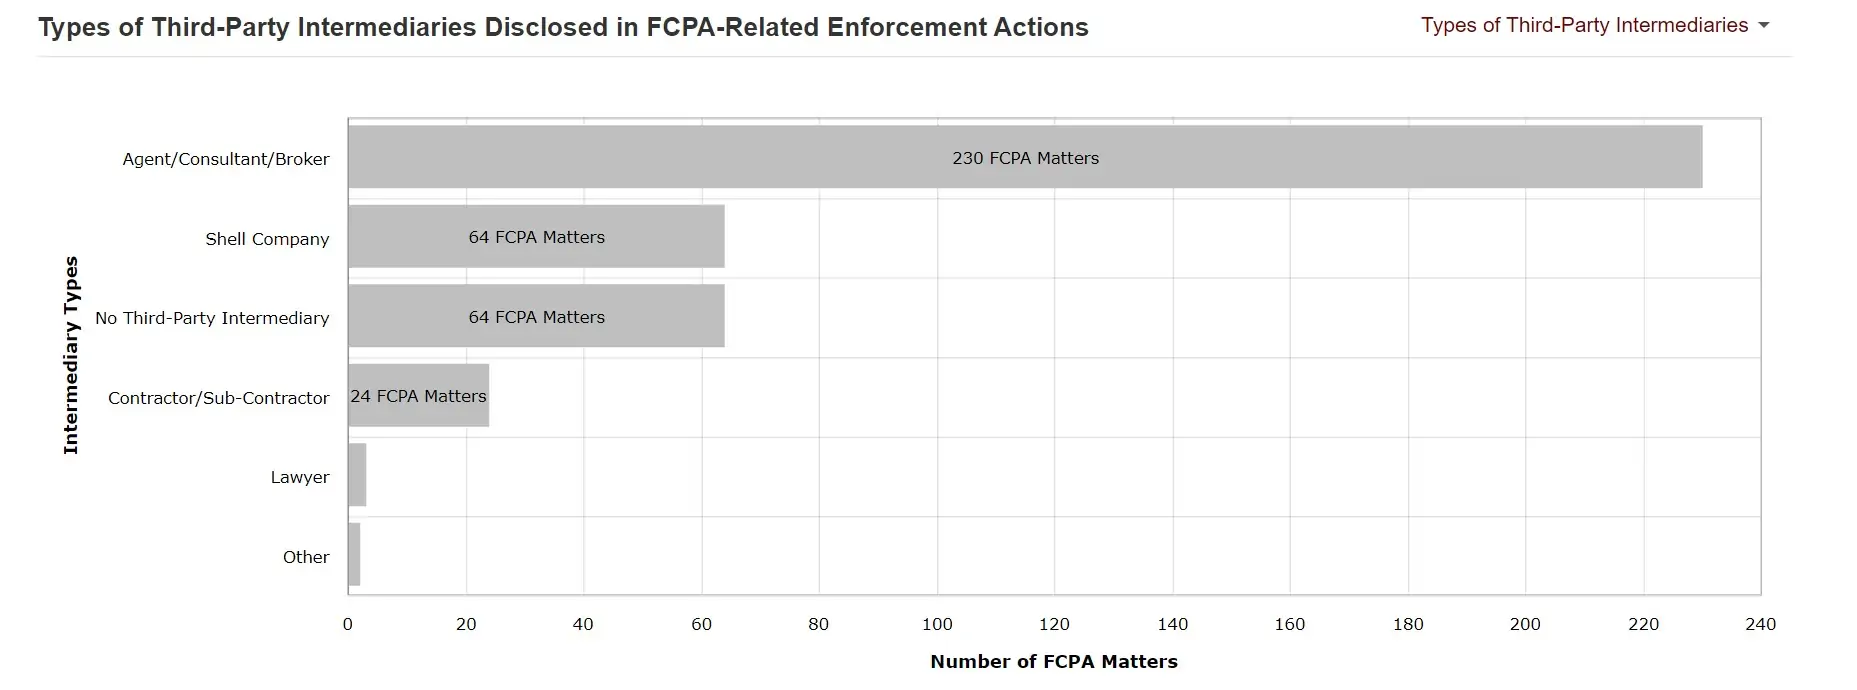 Third Party Intermediaries types disclosed in FCPA related enforcement activites